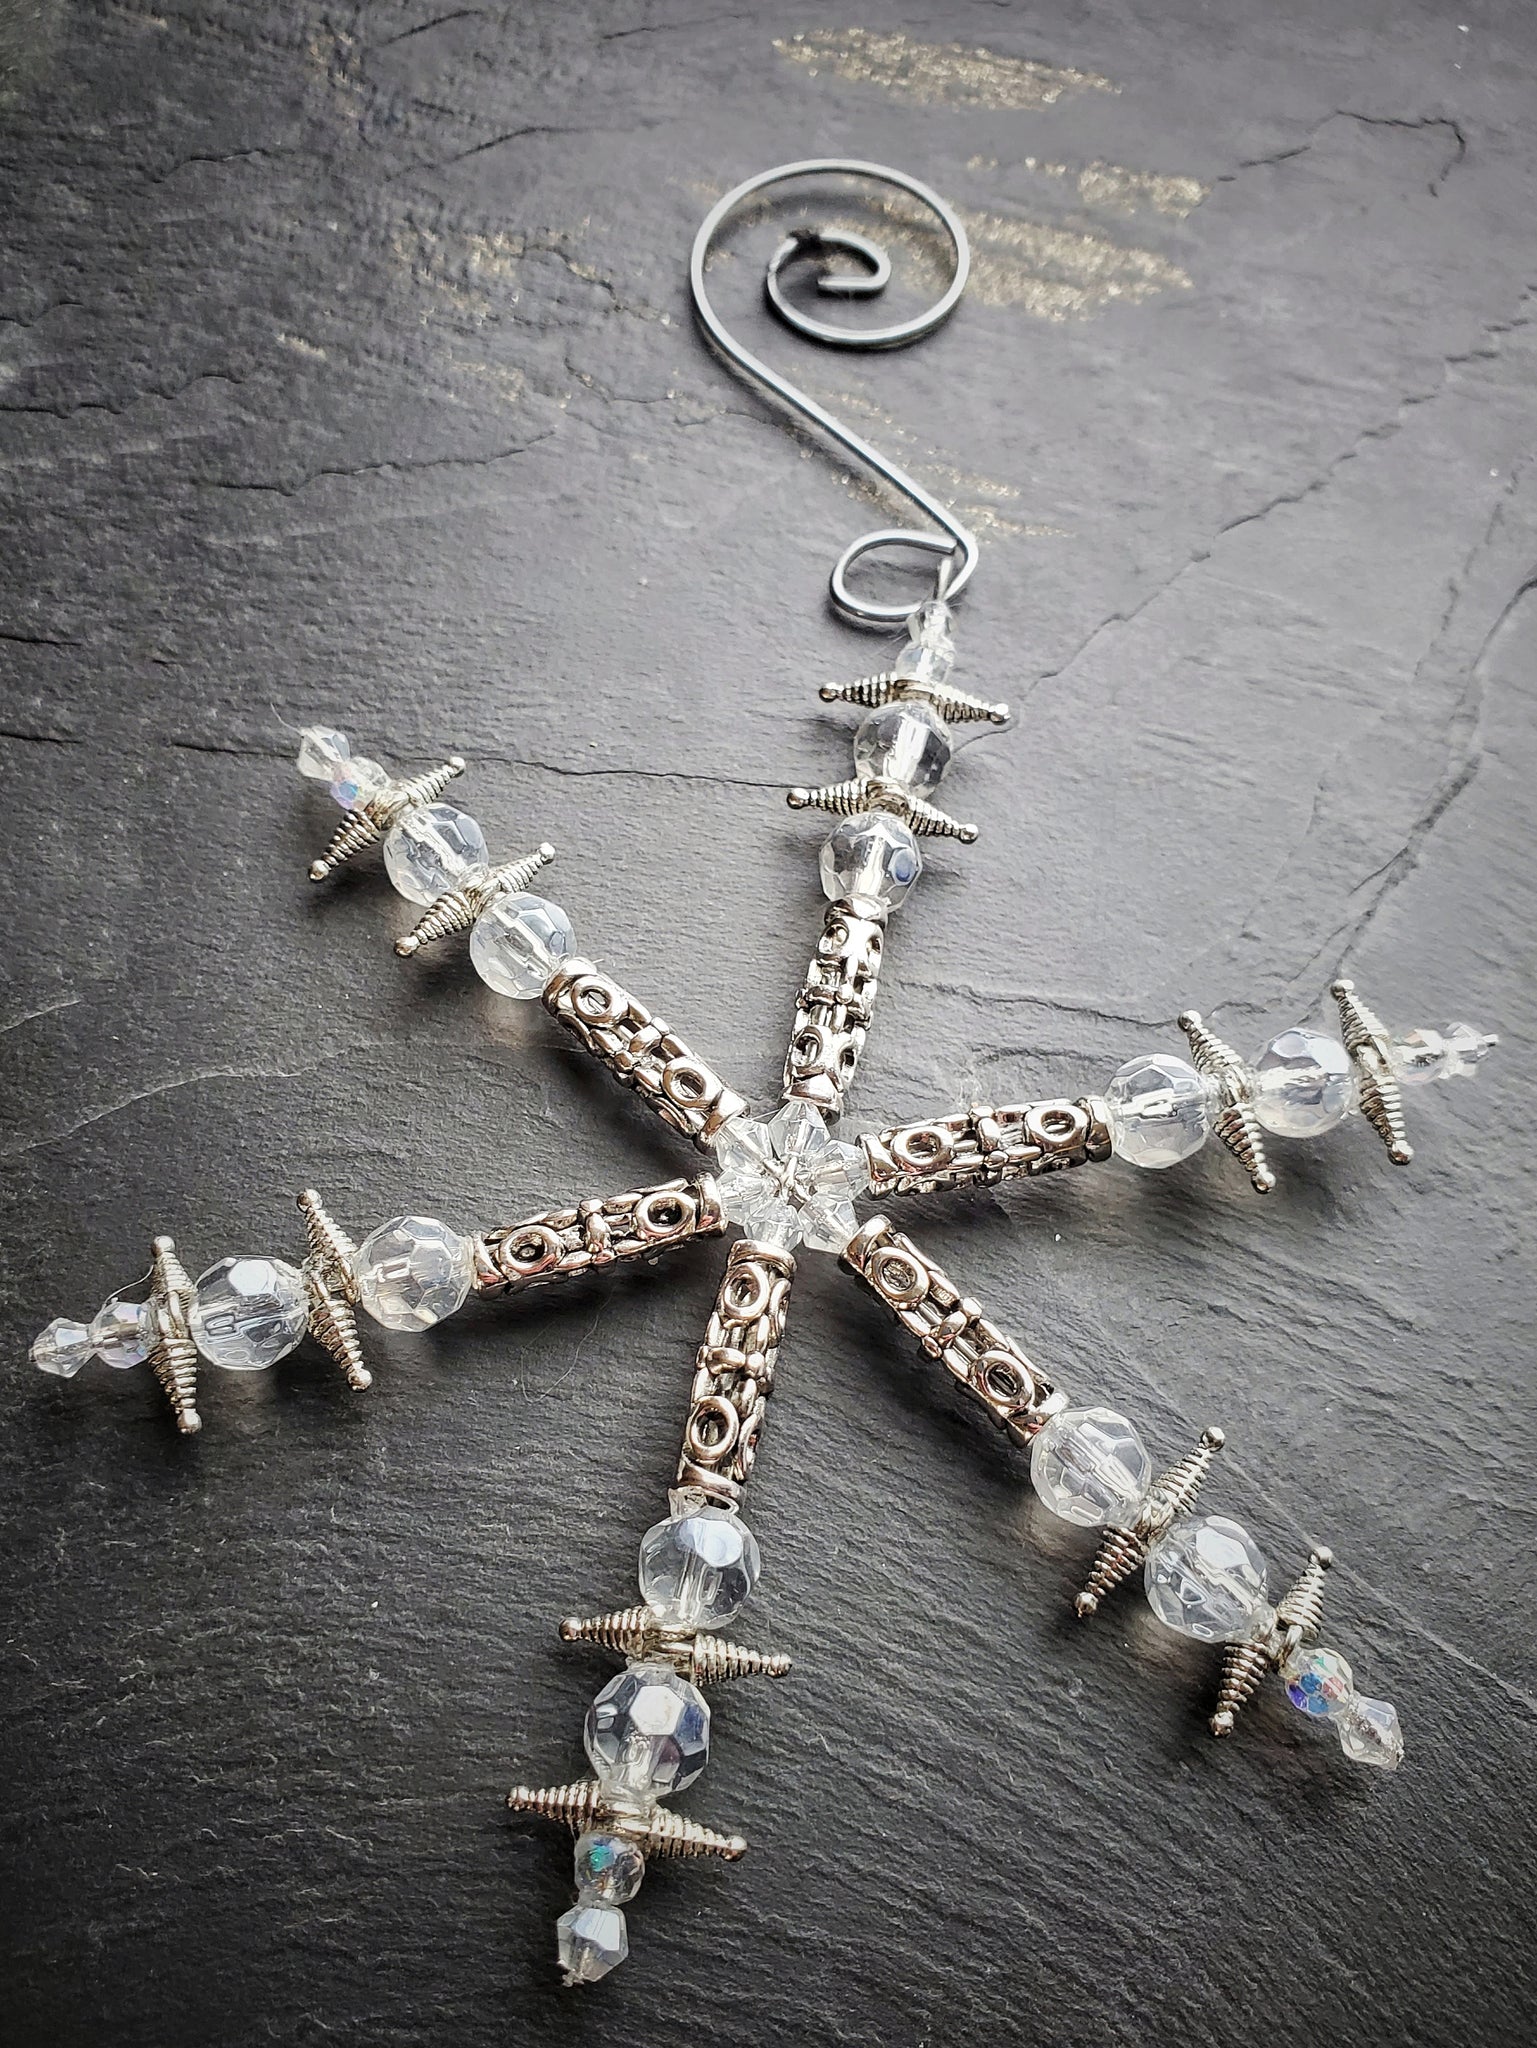 Silver and Crystal Snowflake Ornament Handmade Gift